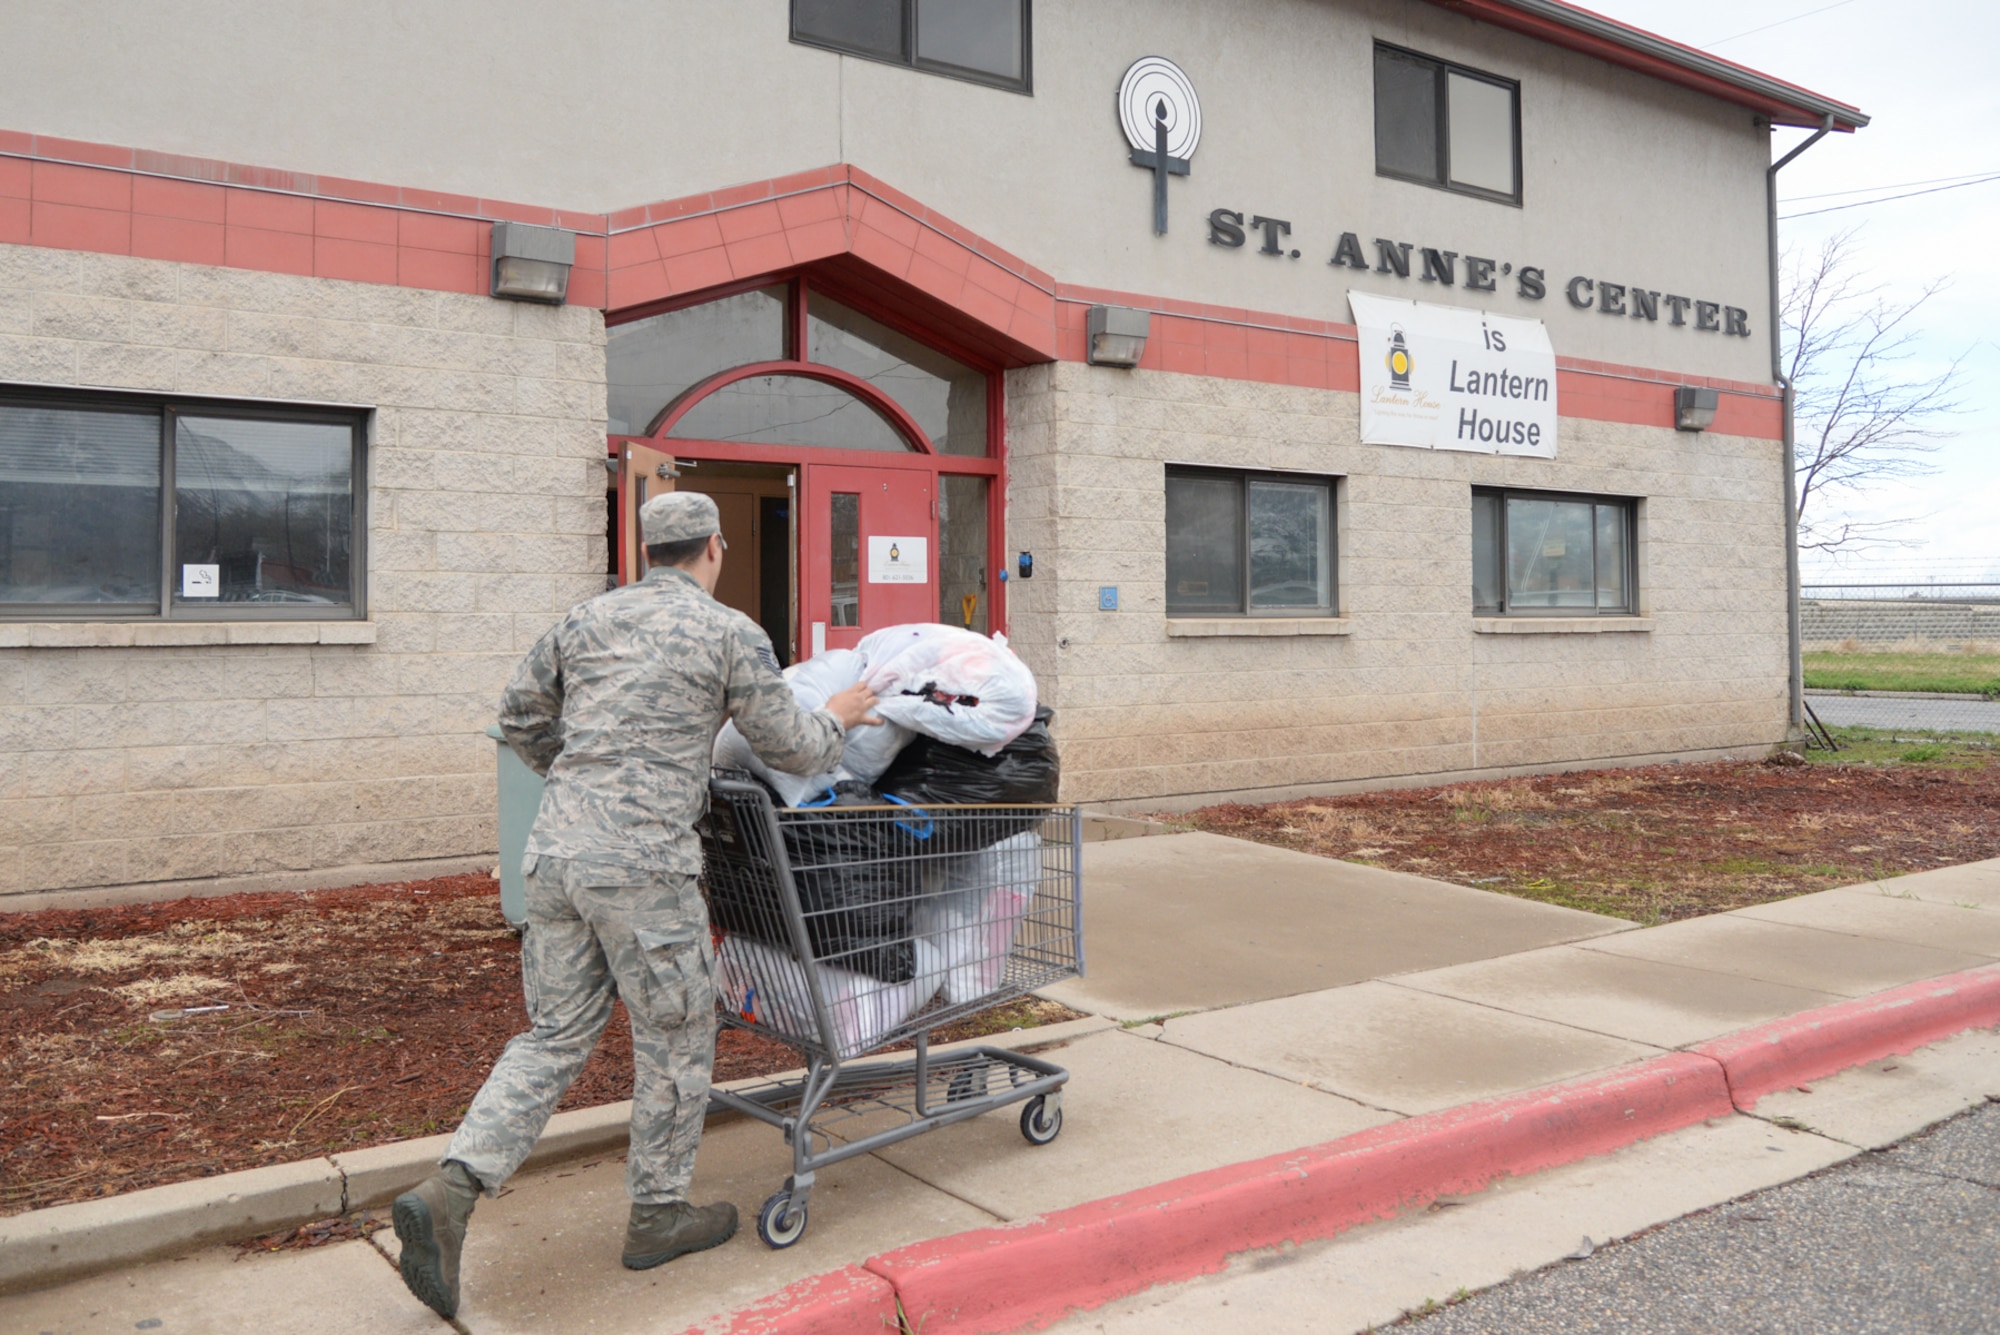 TSgt Tanner Atwood, 75th Logistics Readiness Squadron Vehicle Maintenance, delivers bags of clothing collected during a Hill Air Force Base, Utah clothing drive April 12, 2018, to take to The Lantern House and St. Anne's Center, homeless shelters in Ogden, Utah. (U.S. Air Force photo by Cynthia Griggs)